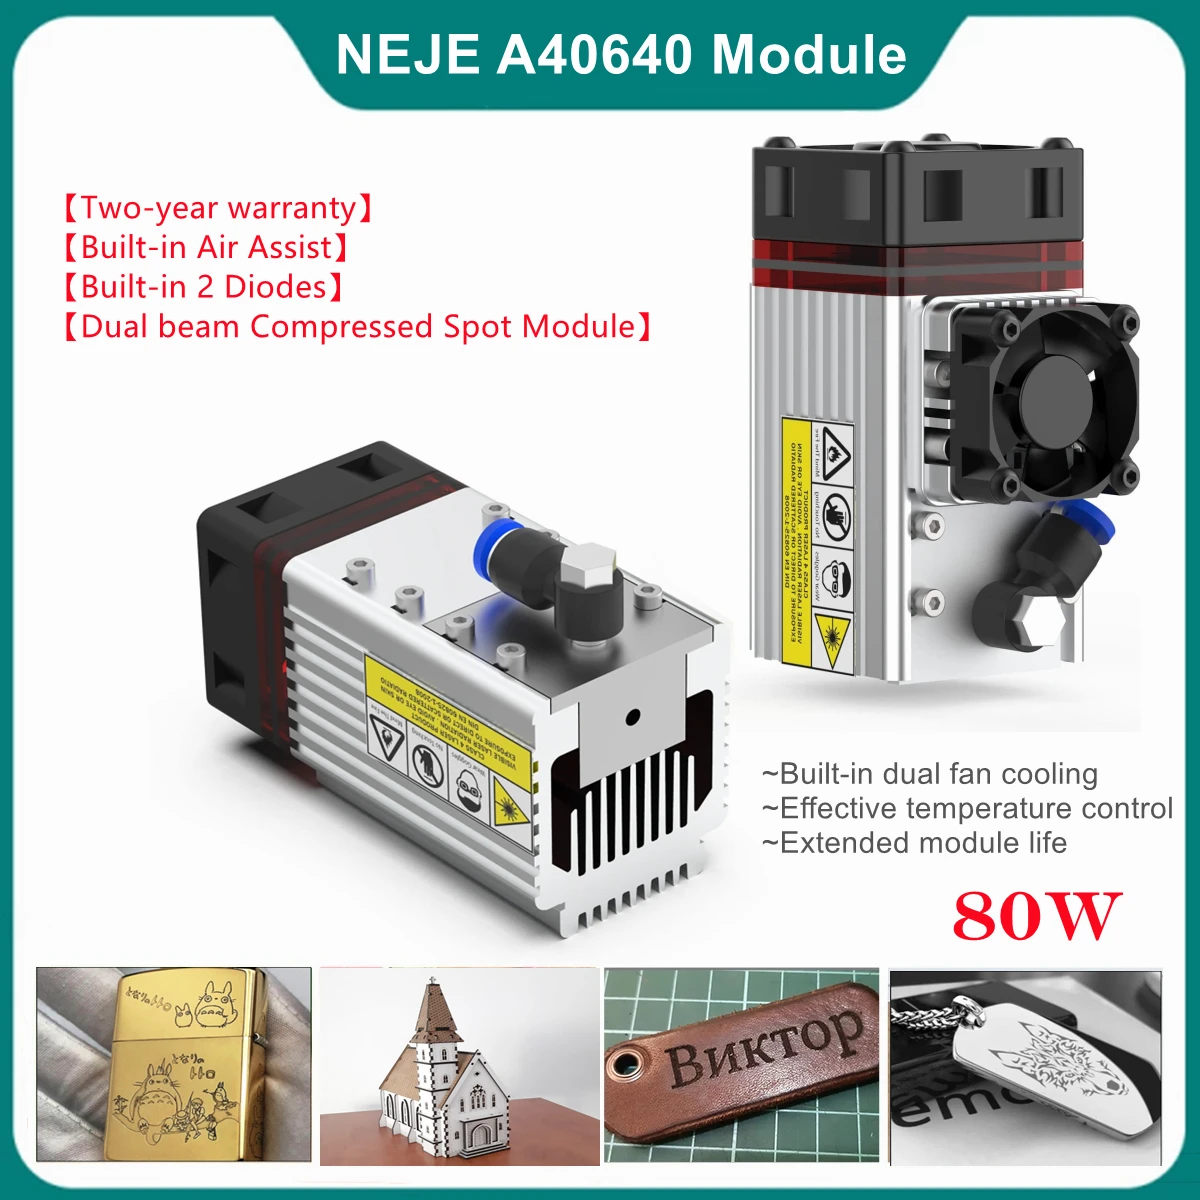 NEJE Laser Module 80W Double Beam A40640 Built-in 2 Diodes Blue Laser for Stainless Steel Print Metal Engraving Wood Cutter Tool